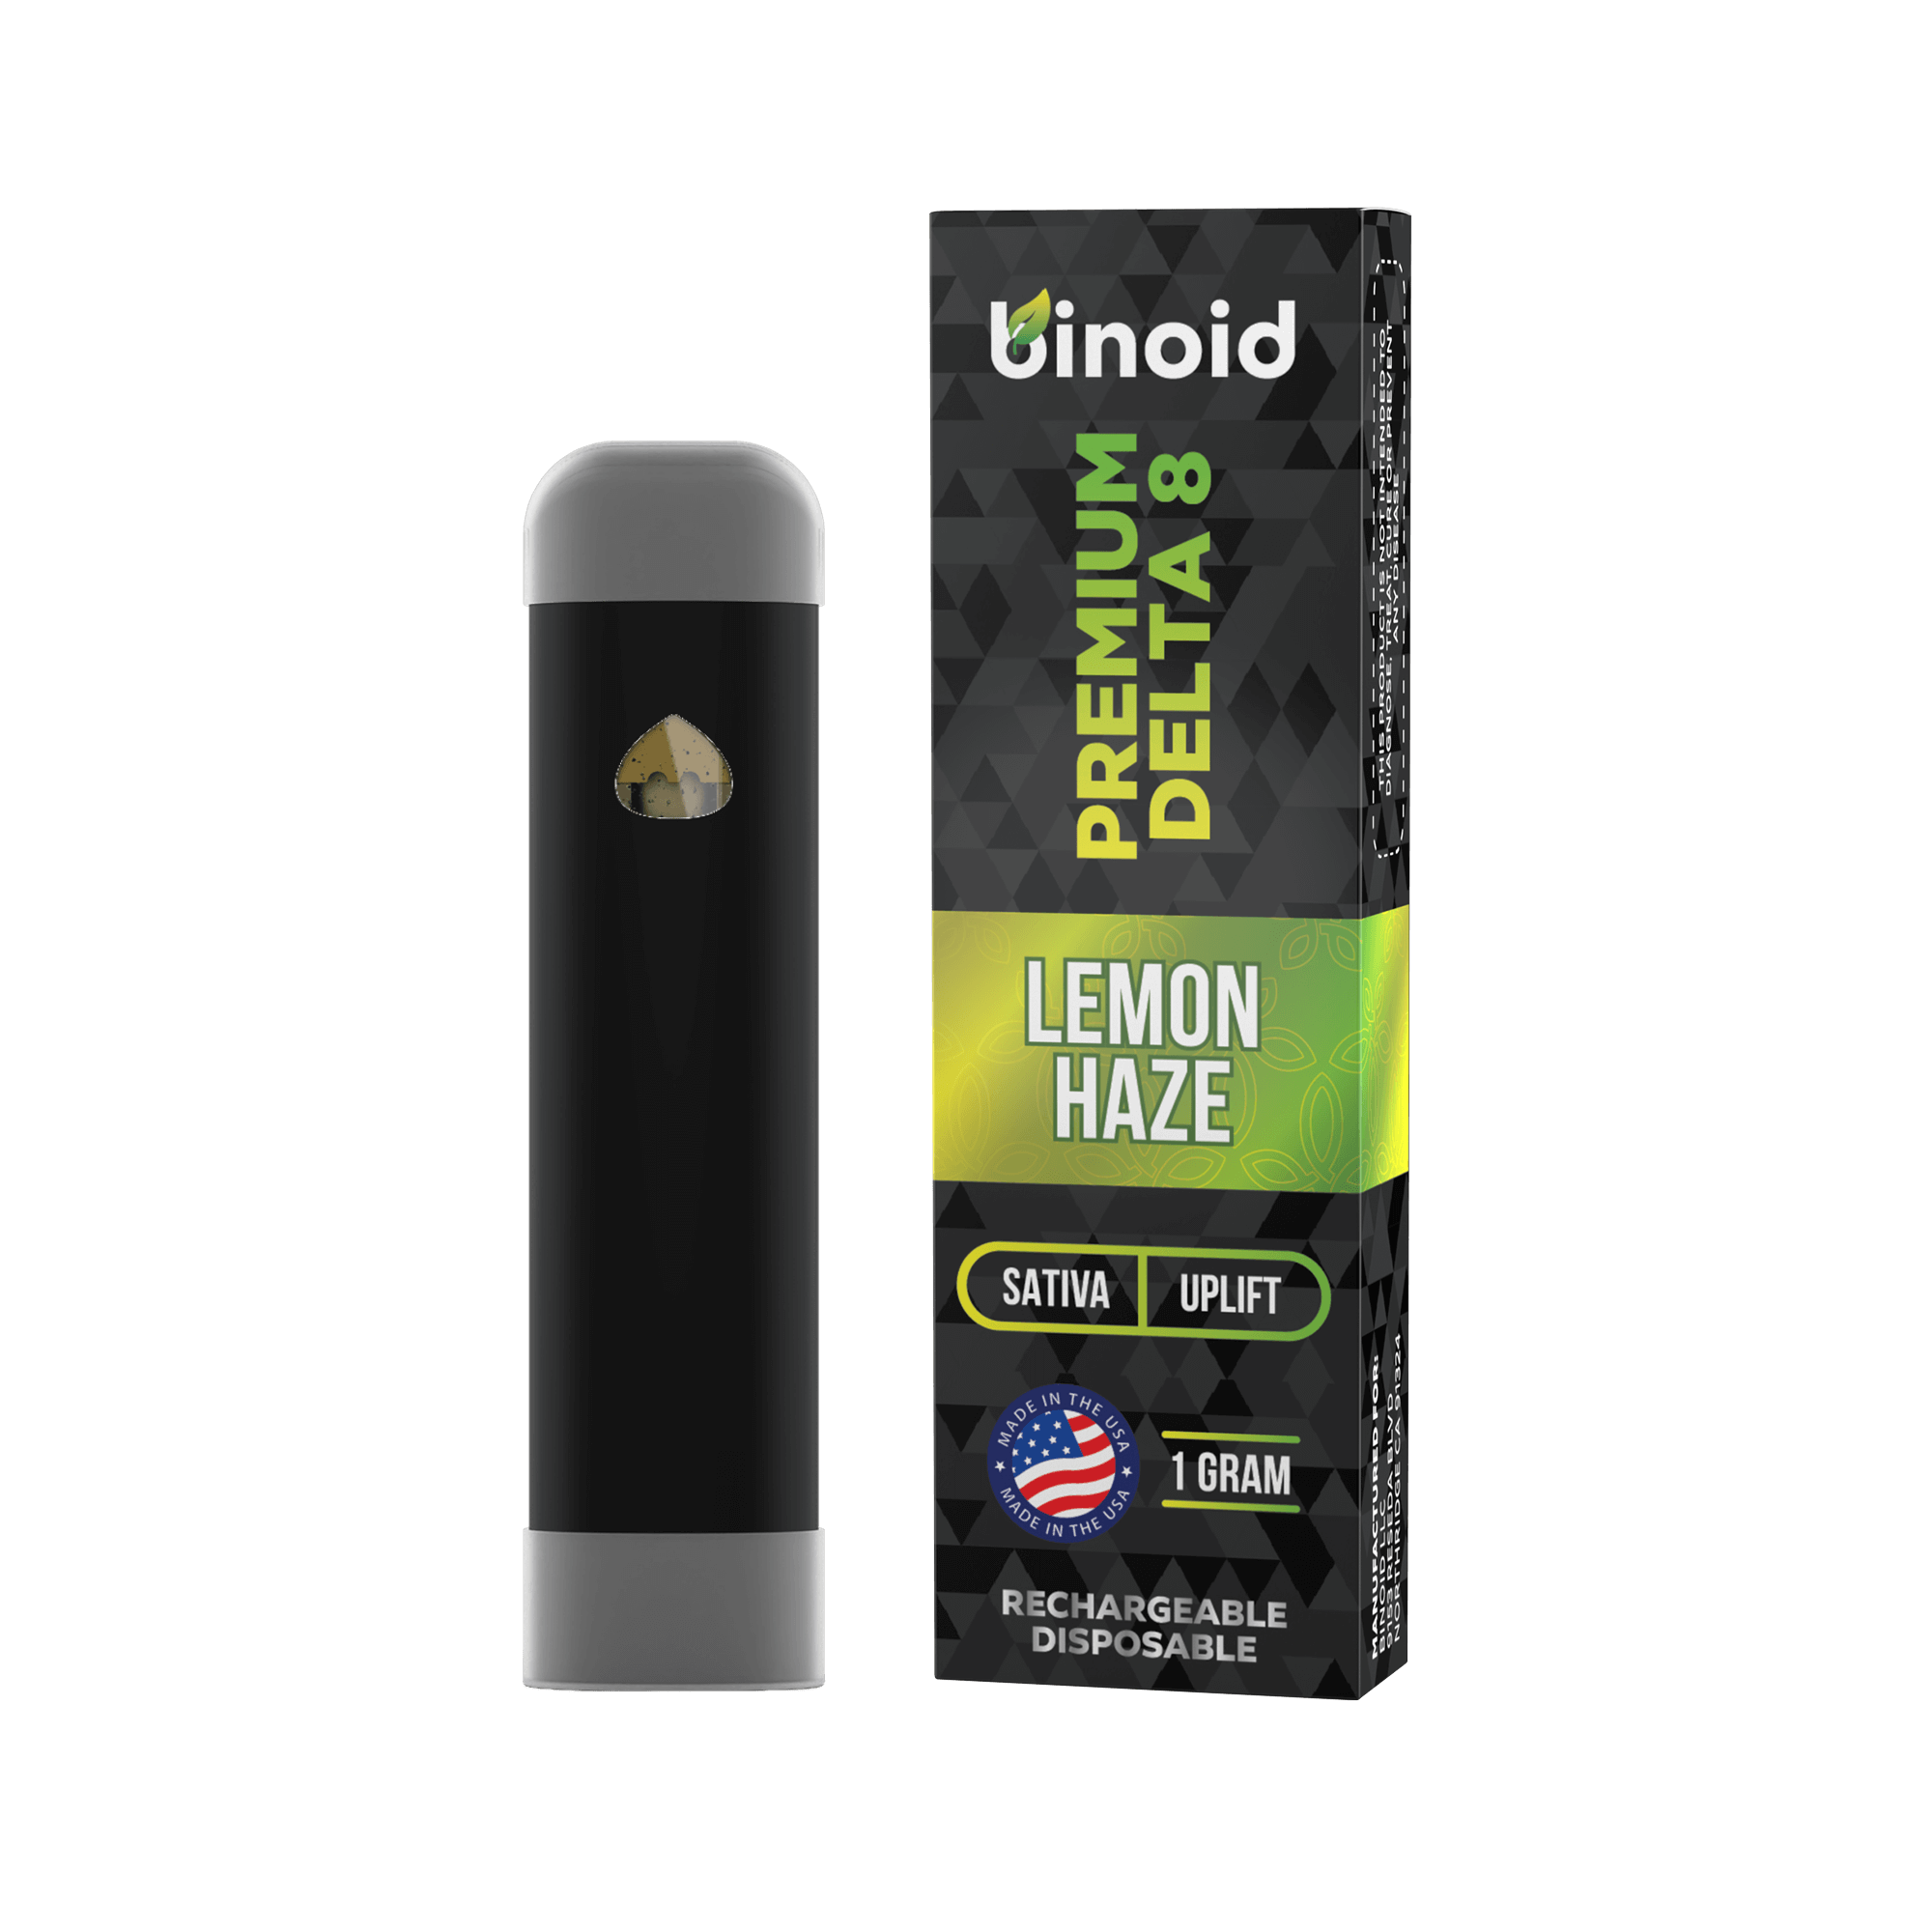 https://www.binoidcbd.com/wp-content/uploads/2022/10/products-Delta-8-THC-Disposable-Vape-Buy-Online-For-Sale-Benefits-Effects-Pain-Anxiety-Sleep-Insomnia_d0f3c669-3520-4817-ba1d-001de34365c2.png